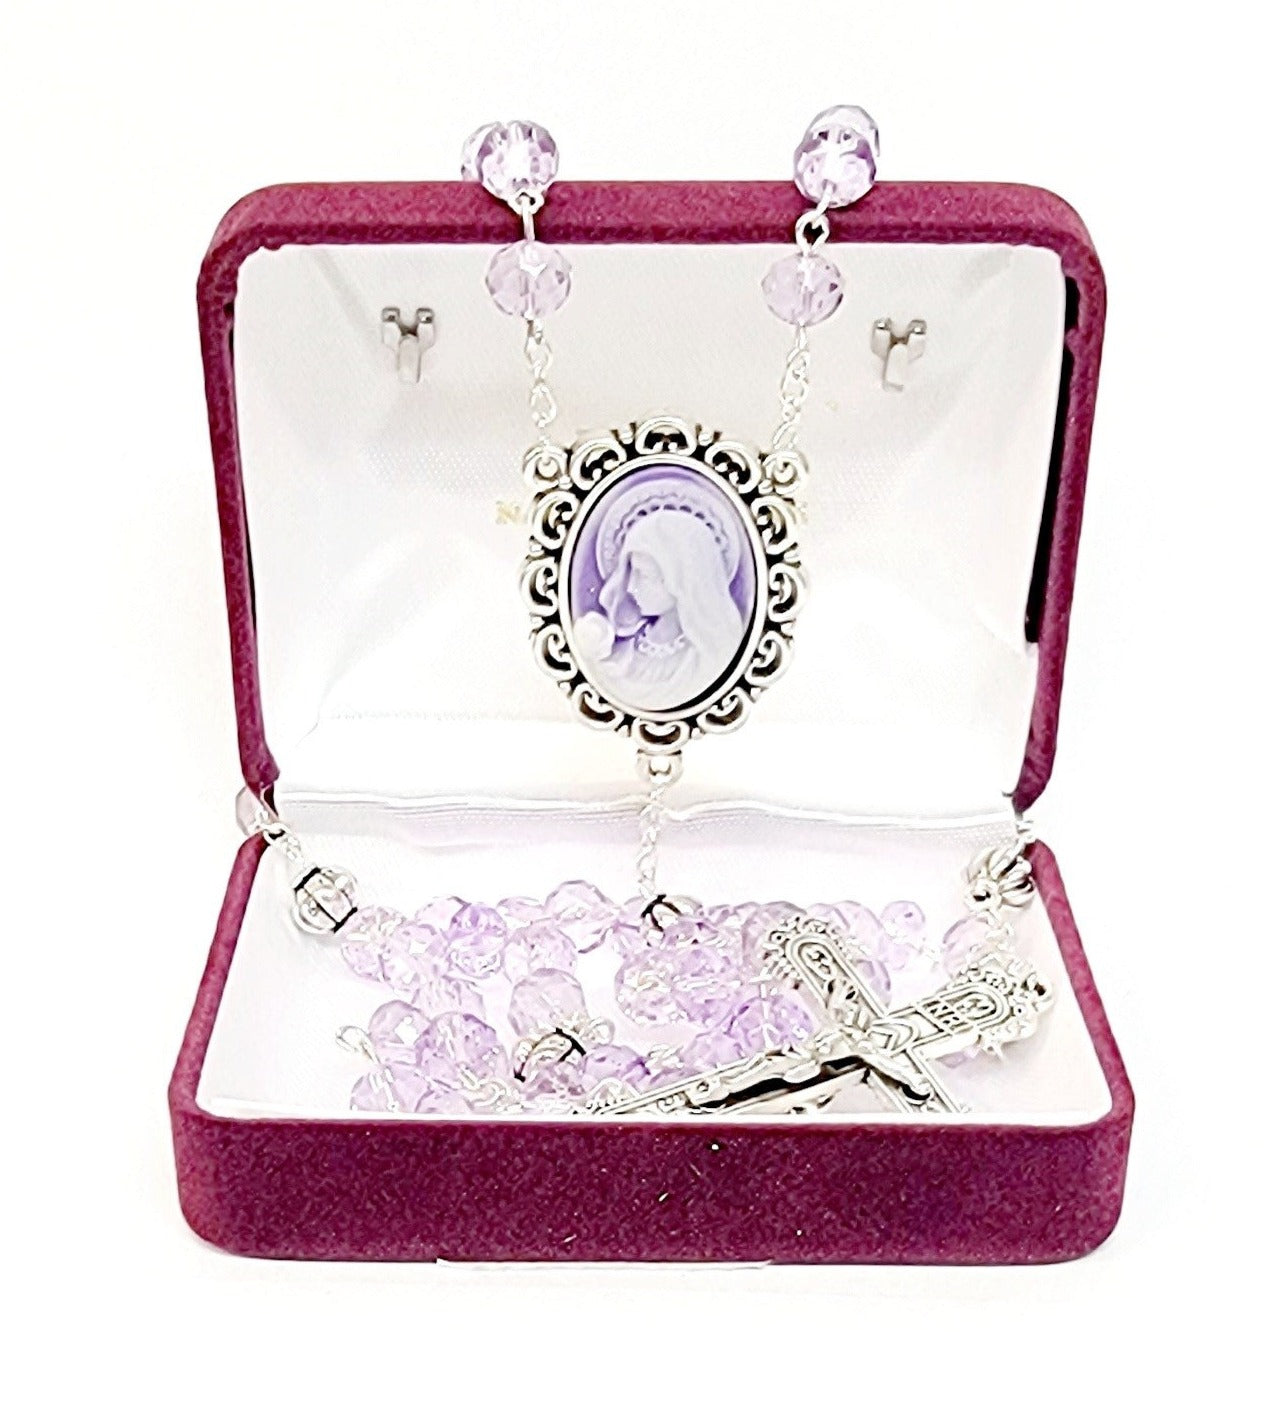 Violet Cameo Our Lady of Lourdes Rosary with Holy Water